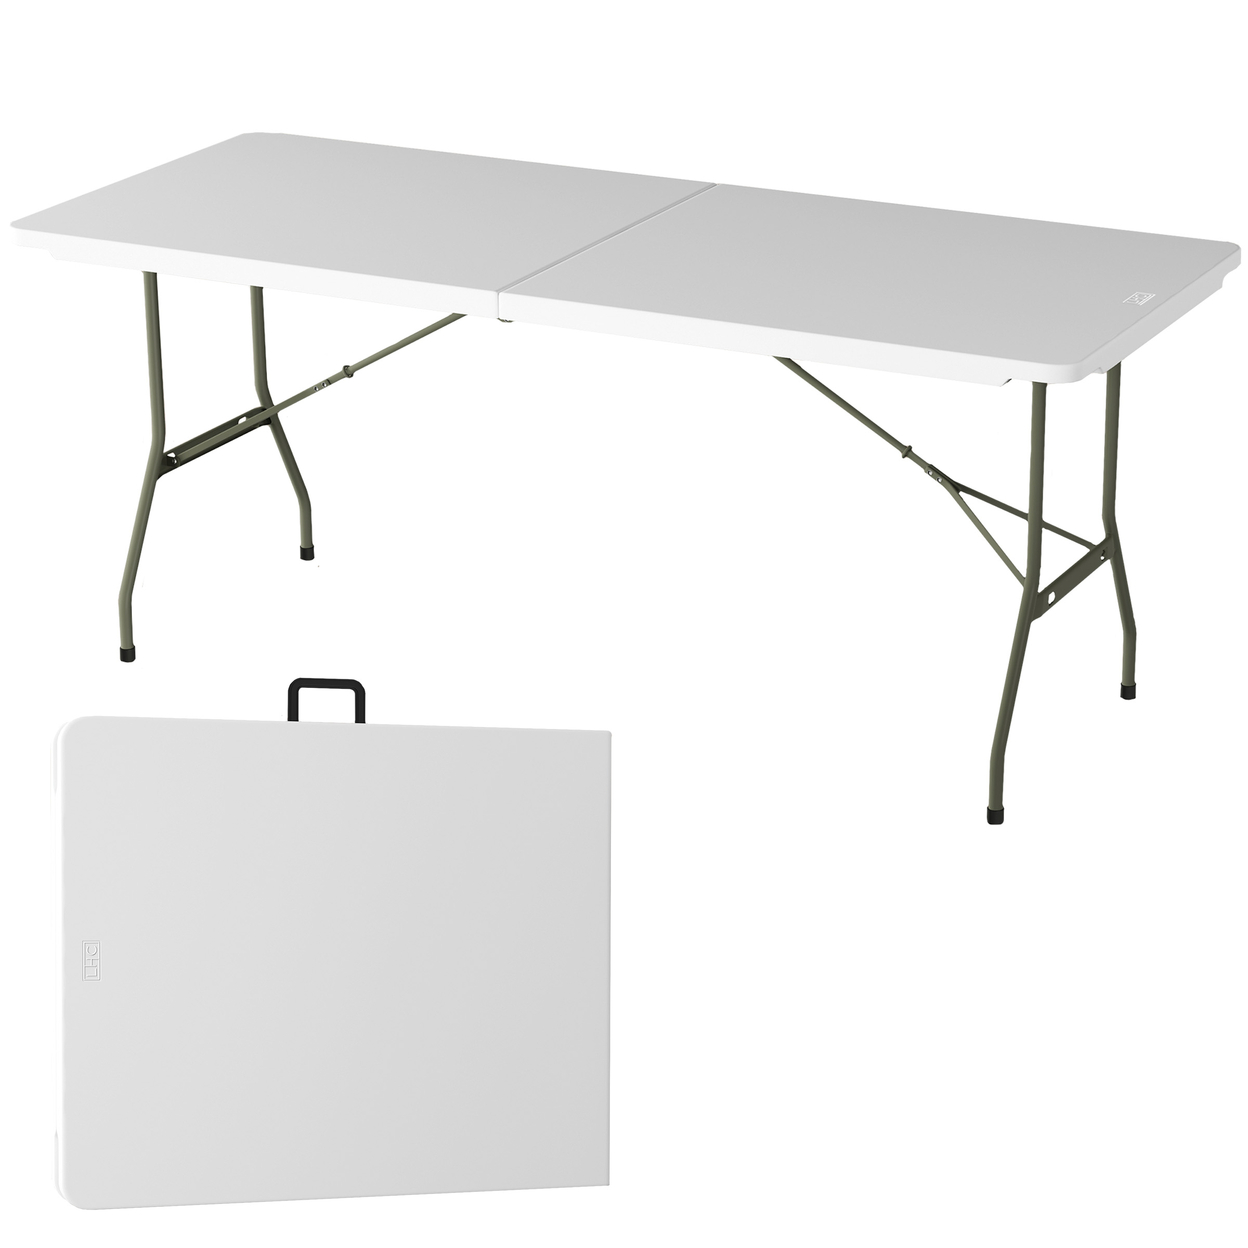 Folding Utility Table 6 Foot Plastic Tabletop Folds In Half For Easy Storage